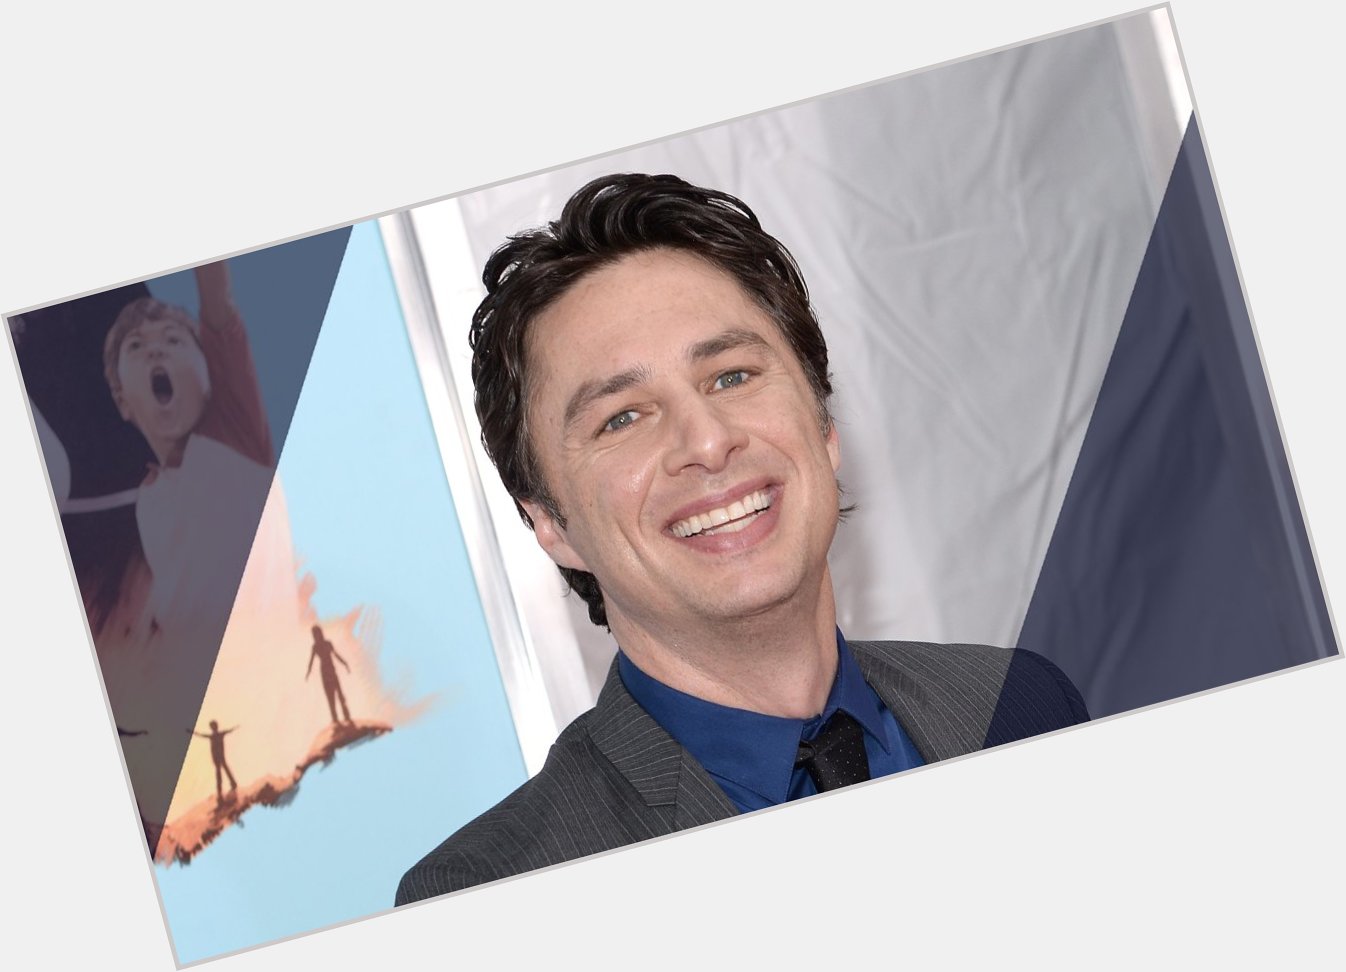 Happy birthday to Zach Braff!

Scrubs all-time classic or overrated? 